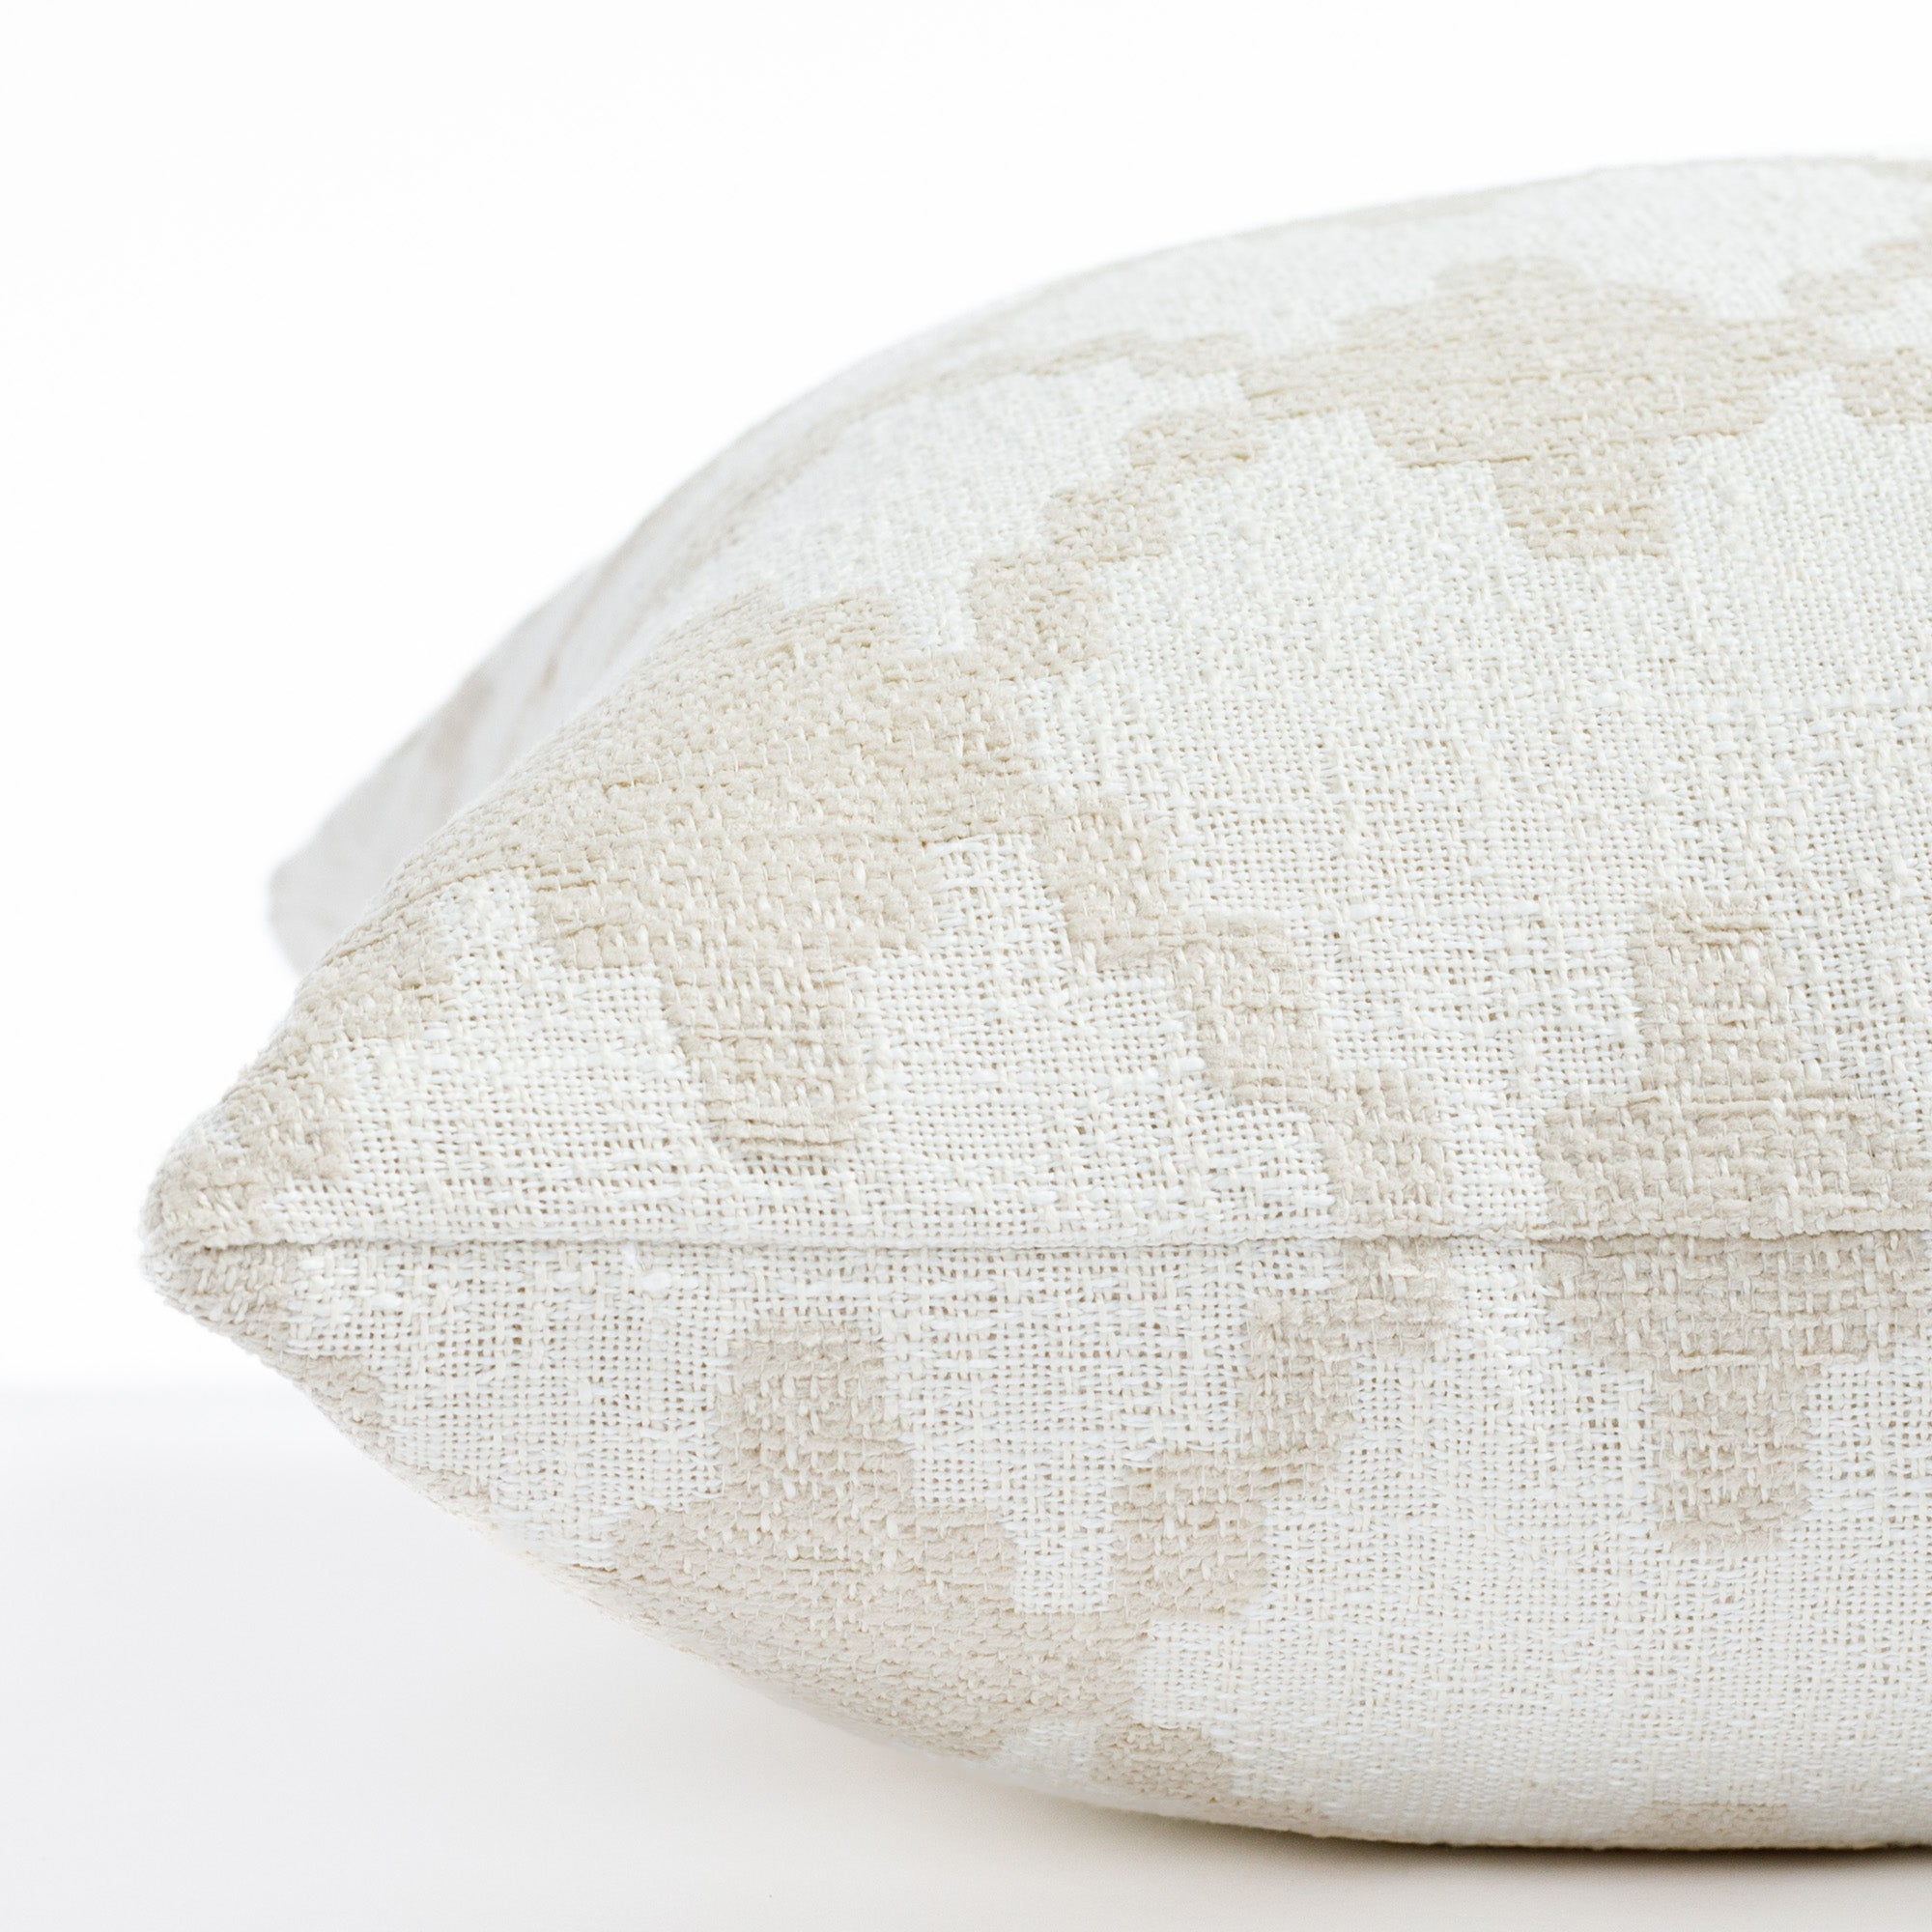 a white and beige diamond trellis patterned pillow: close up side view